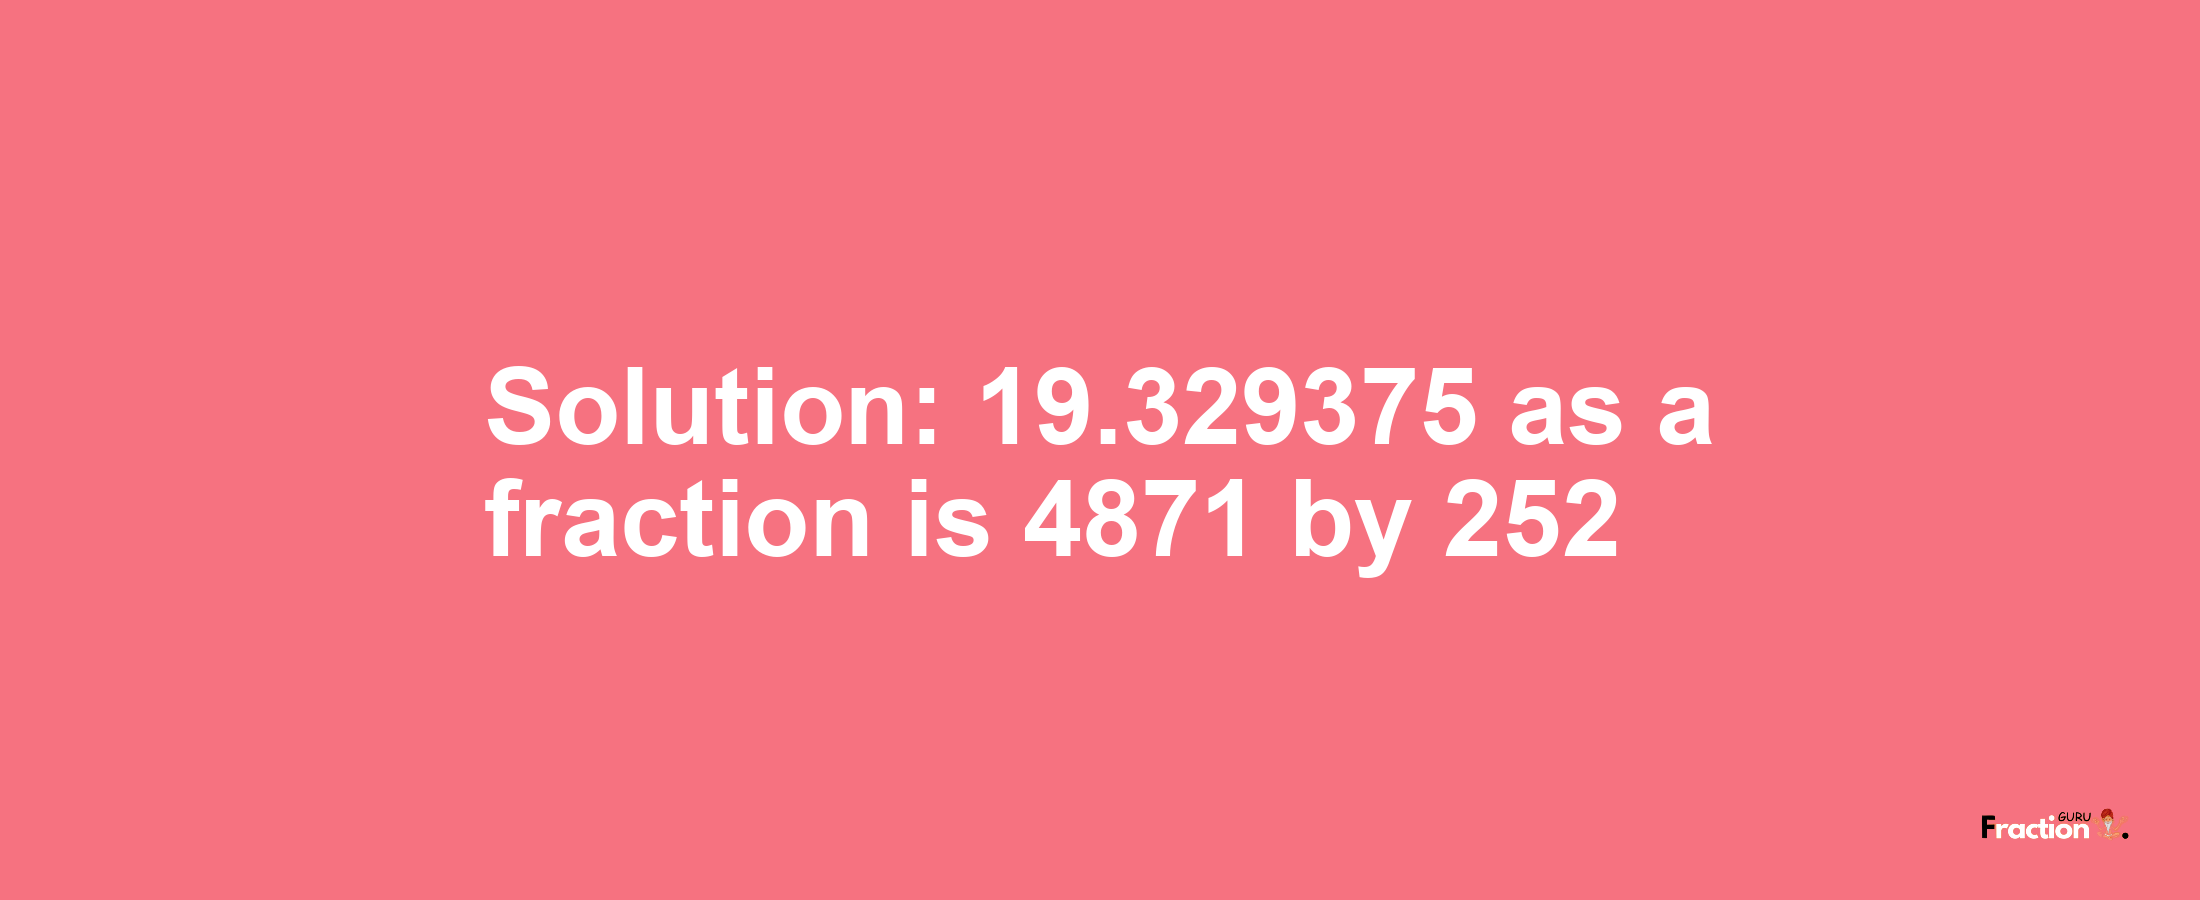 Solution:19.329375 as a fraction is 4871/252